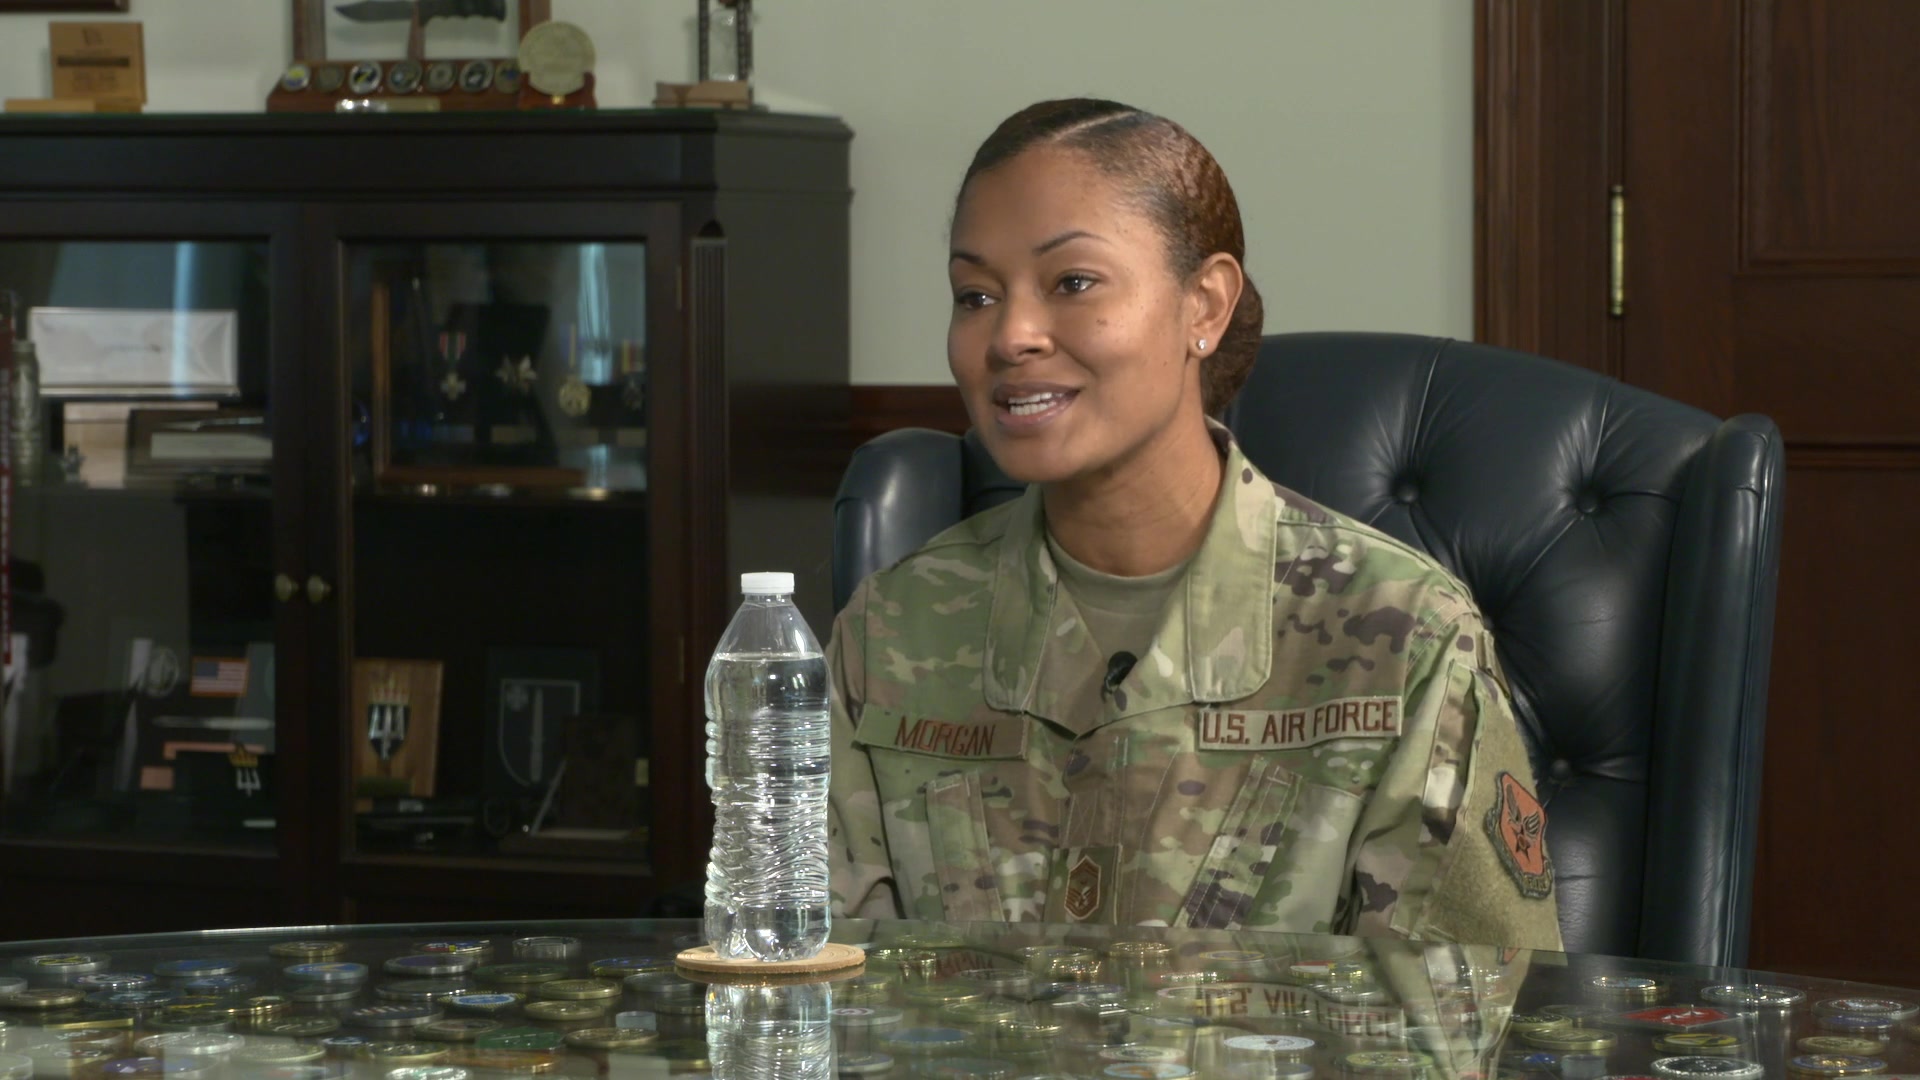 Lt. Gen. Brad Webb, commander of Air Education and Training Command, Chief Master Sgt. Natasha Williams, Superintendent of the 59th Medical Logistics Readiness Squadron; and Senior Master Sgt. Sapphire Morgan, First Sergeant of the Air Force Personnel Center., engage in conversations on race and diversity in the Air Force. This is the Third episode of the "Real Talk: Race and Diversity in the Air Force" series hosted by AETC. (U.S. Air Force video by Marcelo Joniaux, Tanelle Marshall, William Wagner).